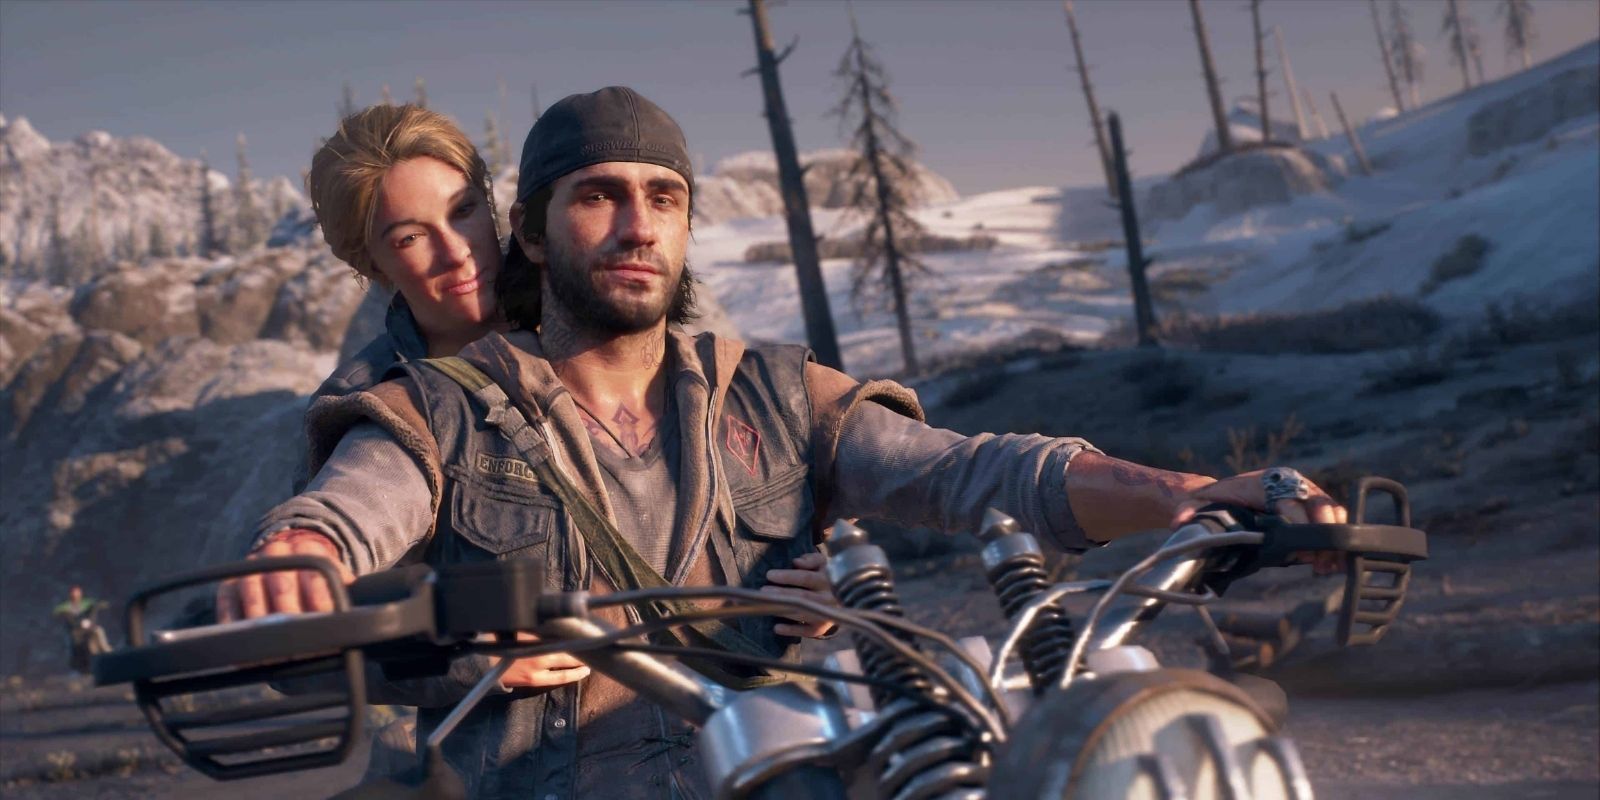 Days Gone Sold Over 9 Million Copies - But PlayStation Sees It As a Failure